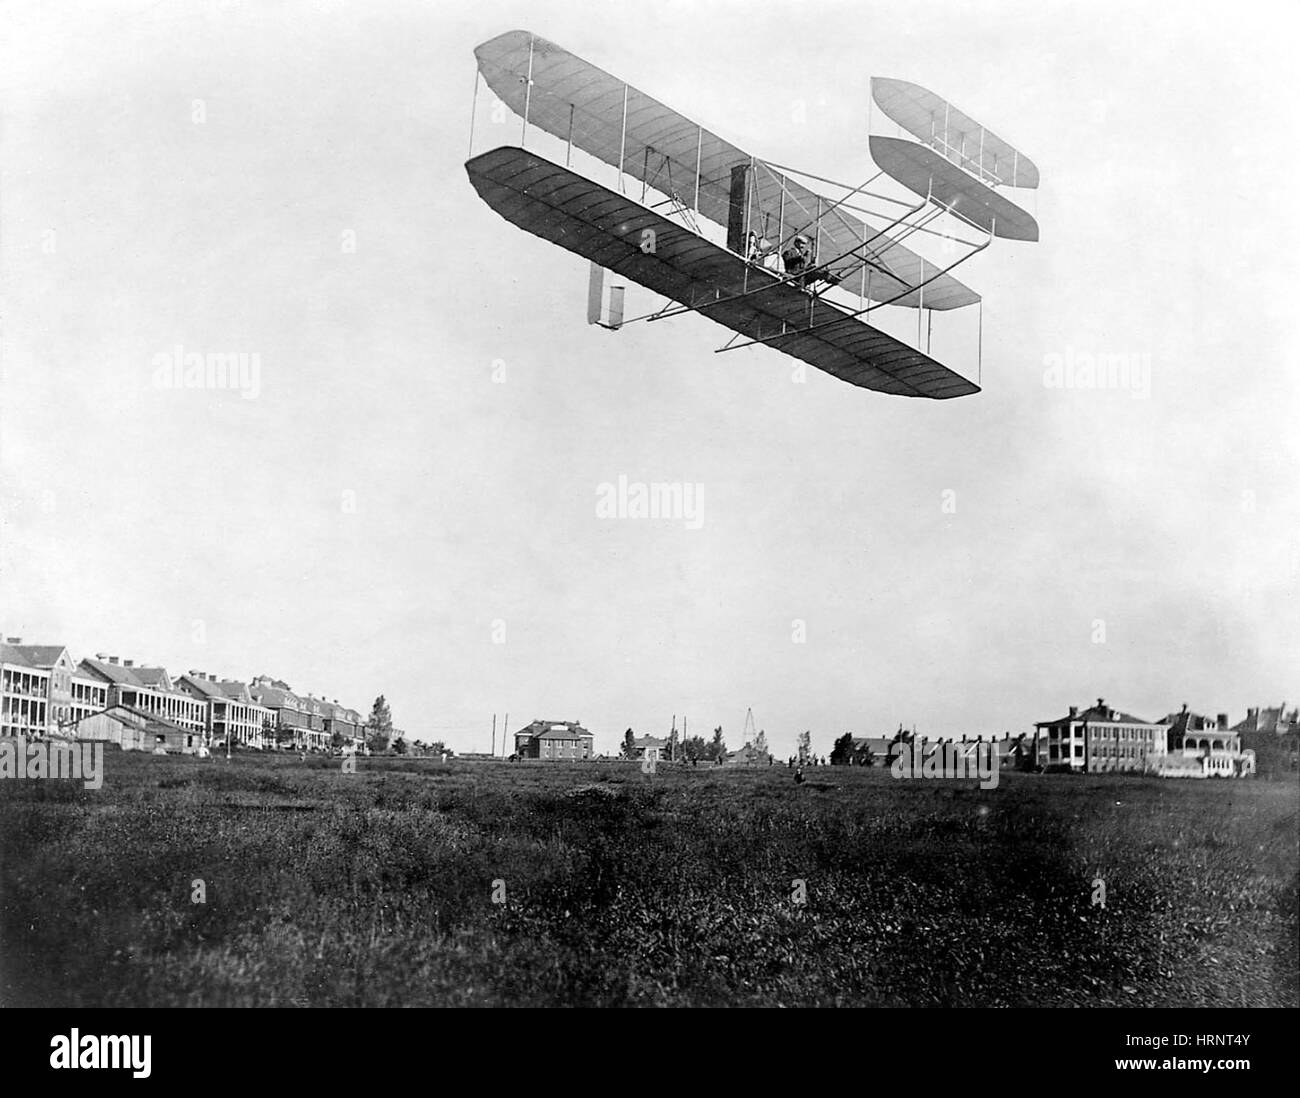 Orville Wright in Wright Flyer, 1908 Foto Stock